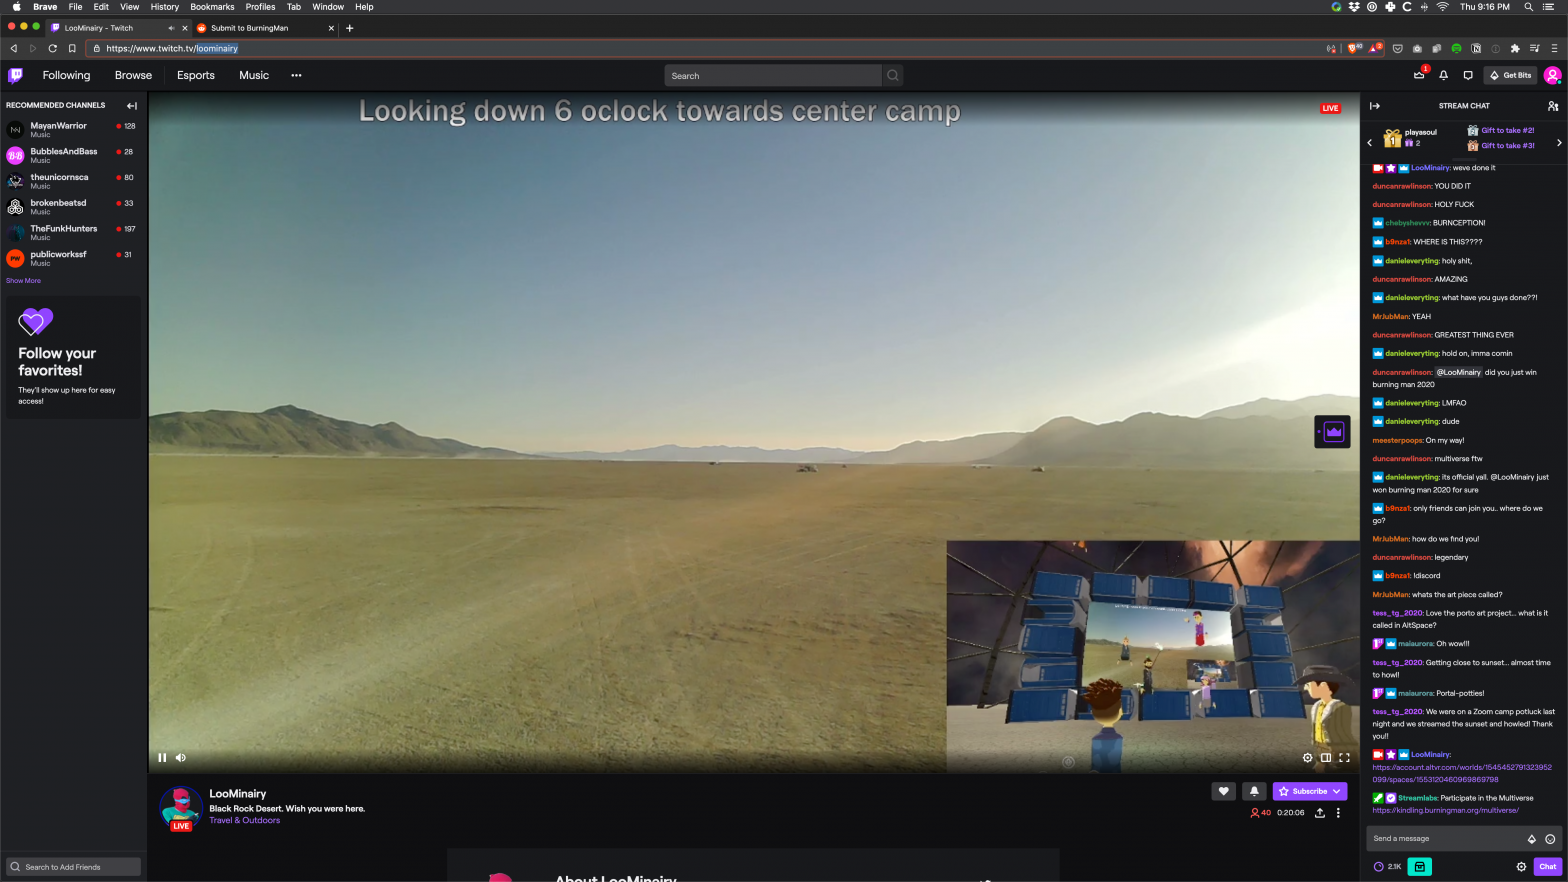 Burnception Live Streaming From The Playa in BRCvr